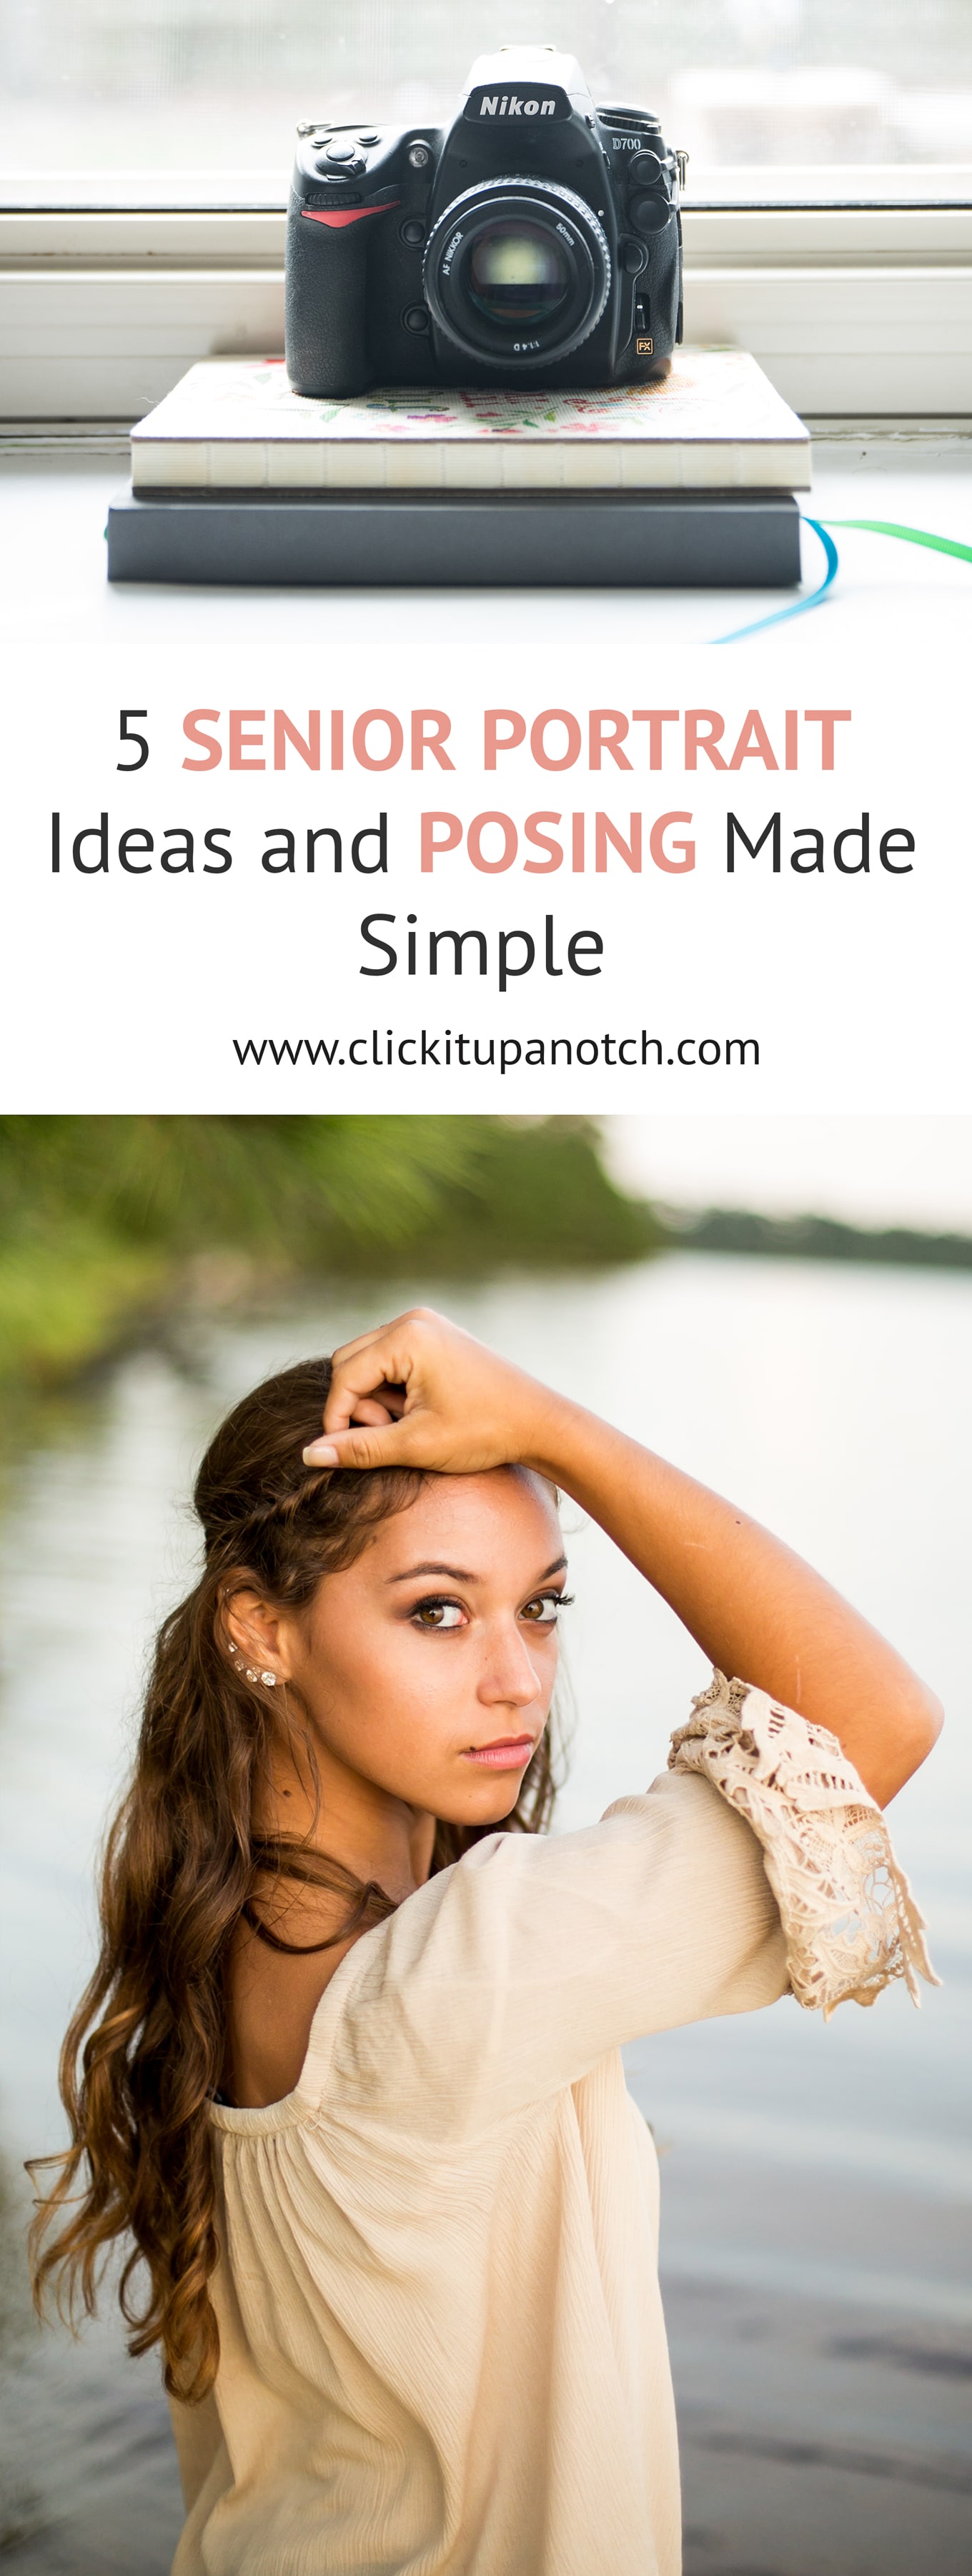 These ideas are also great for other types of portrait sessions. There are bonus tips at the end too! Read "5 Senior Portrait Ideas and Posing Made Simple"